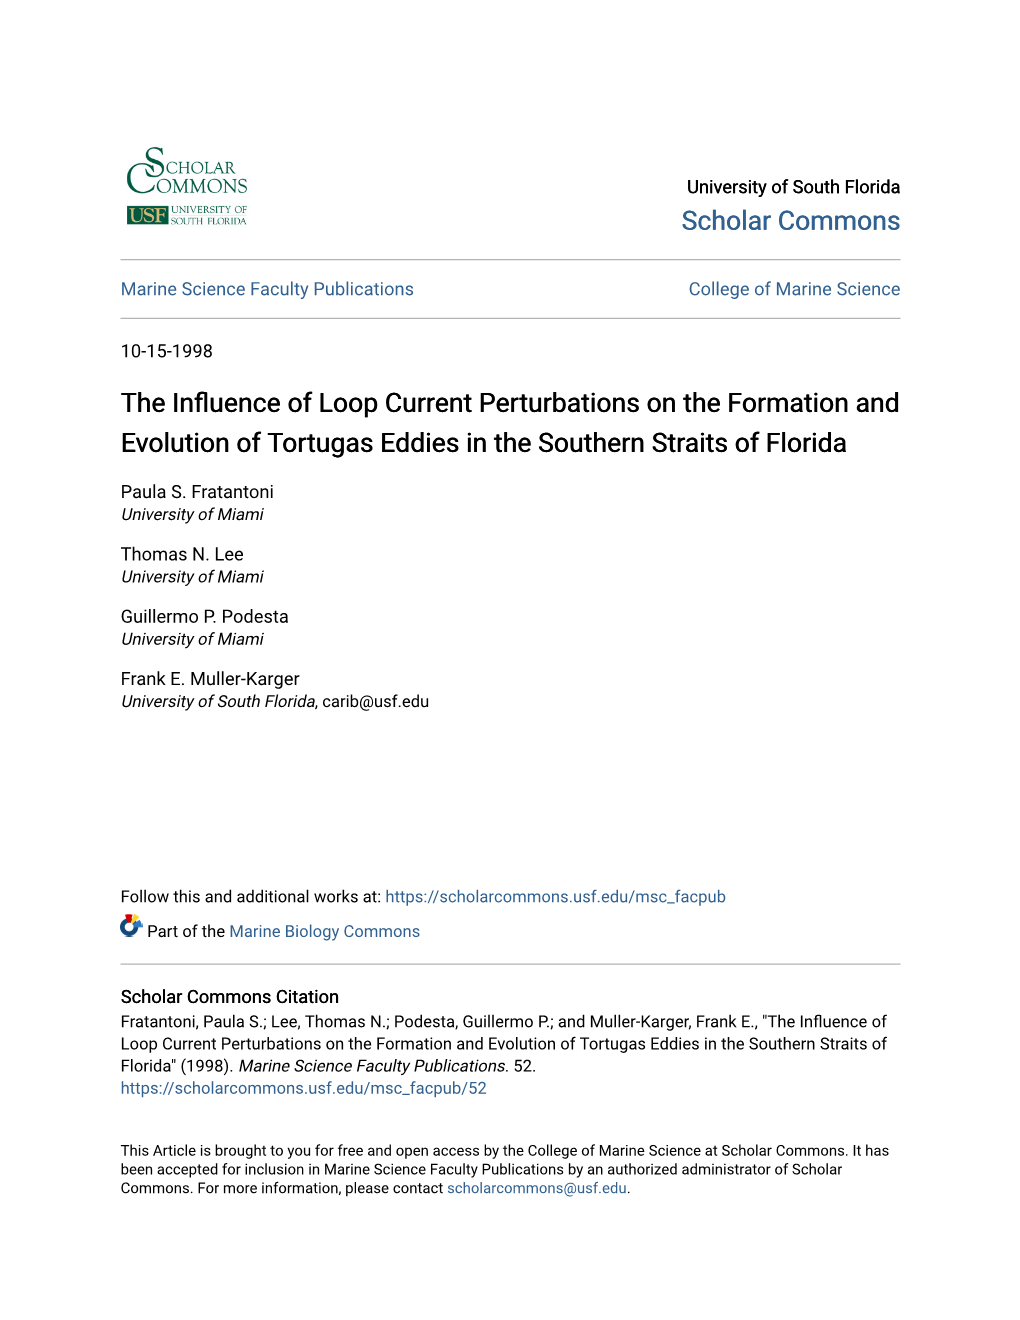 The Influence of Loop Current Perturbations on the Formation and Evolution of Tortugas Eddies in the Southern Straits of Florida